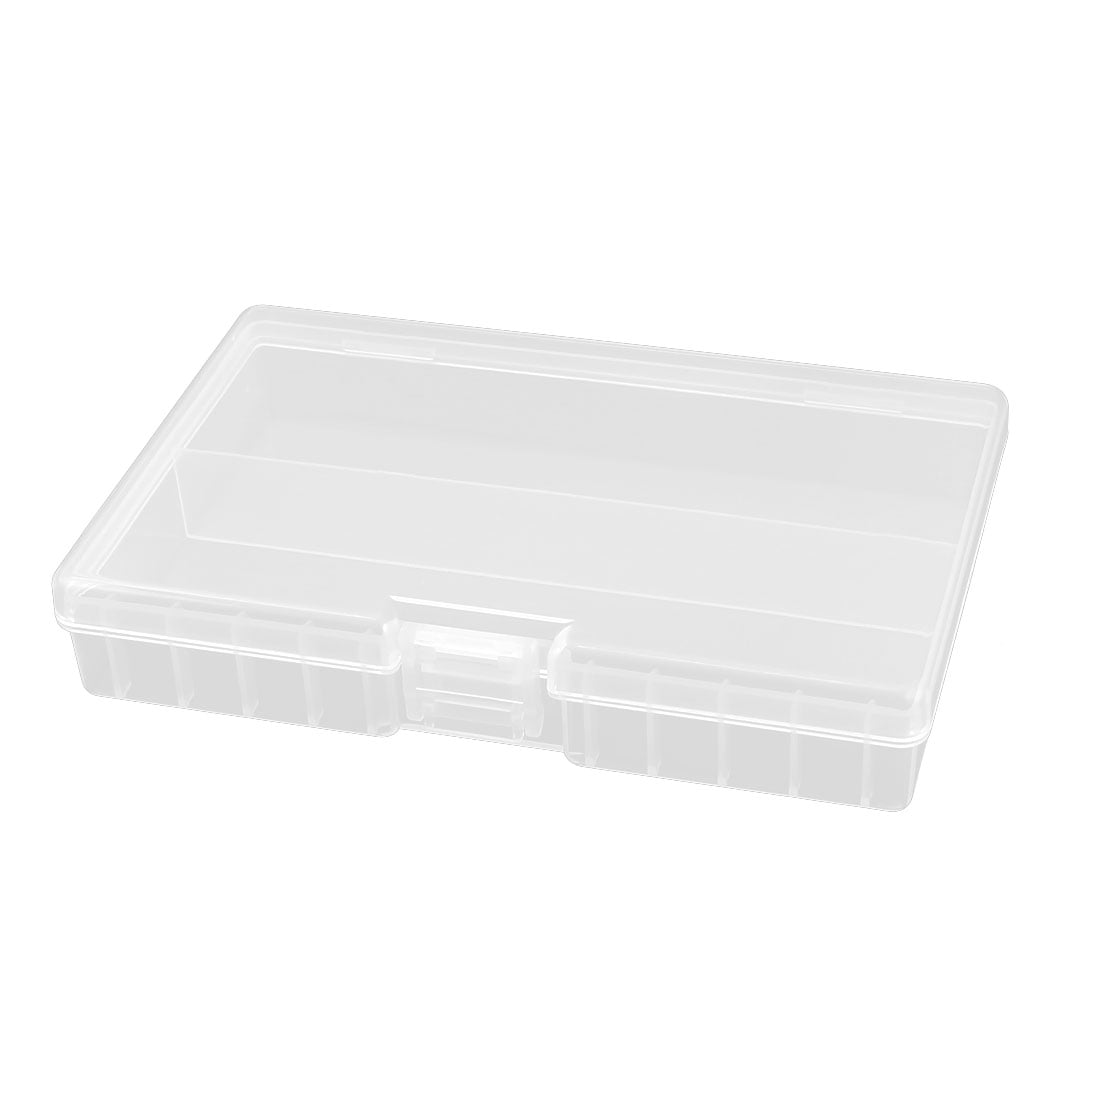 Hard Plastic Case Holder Storage Box Container for 48 x AA Battery 